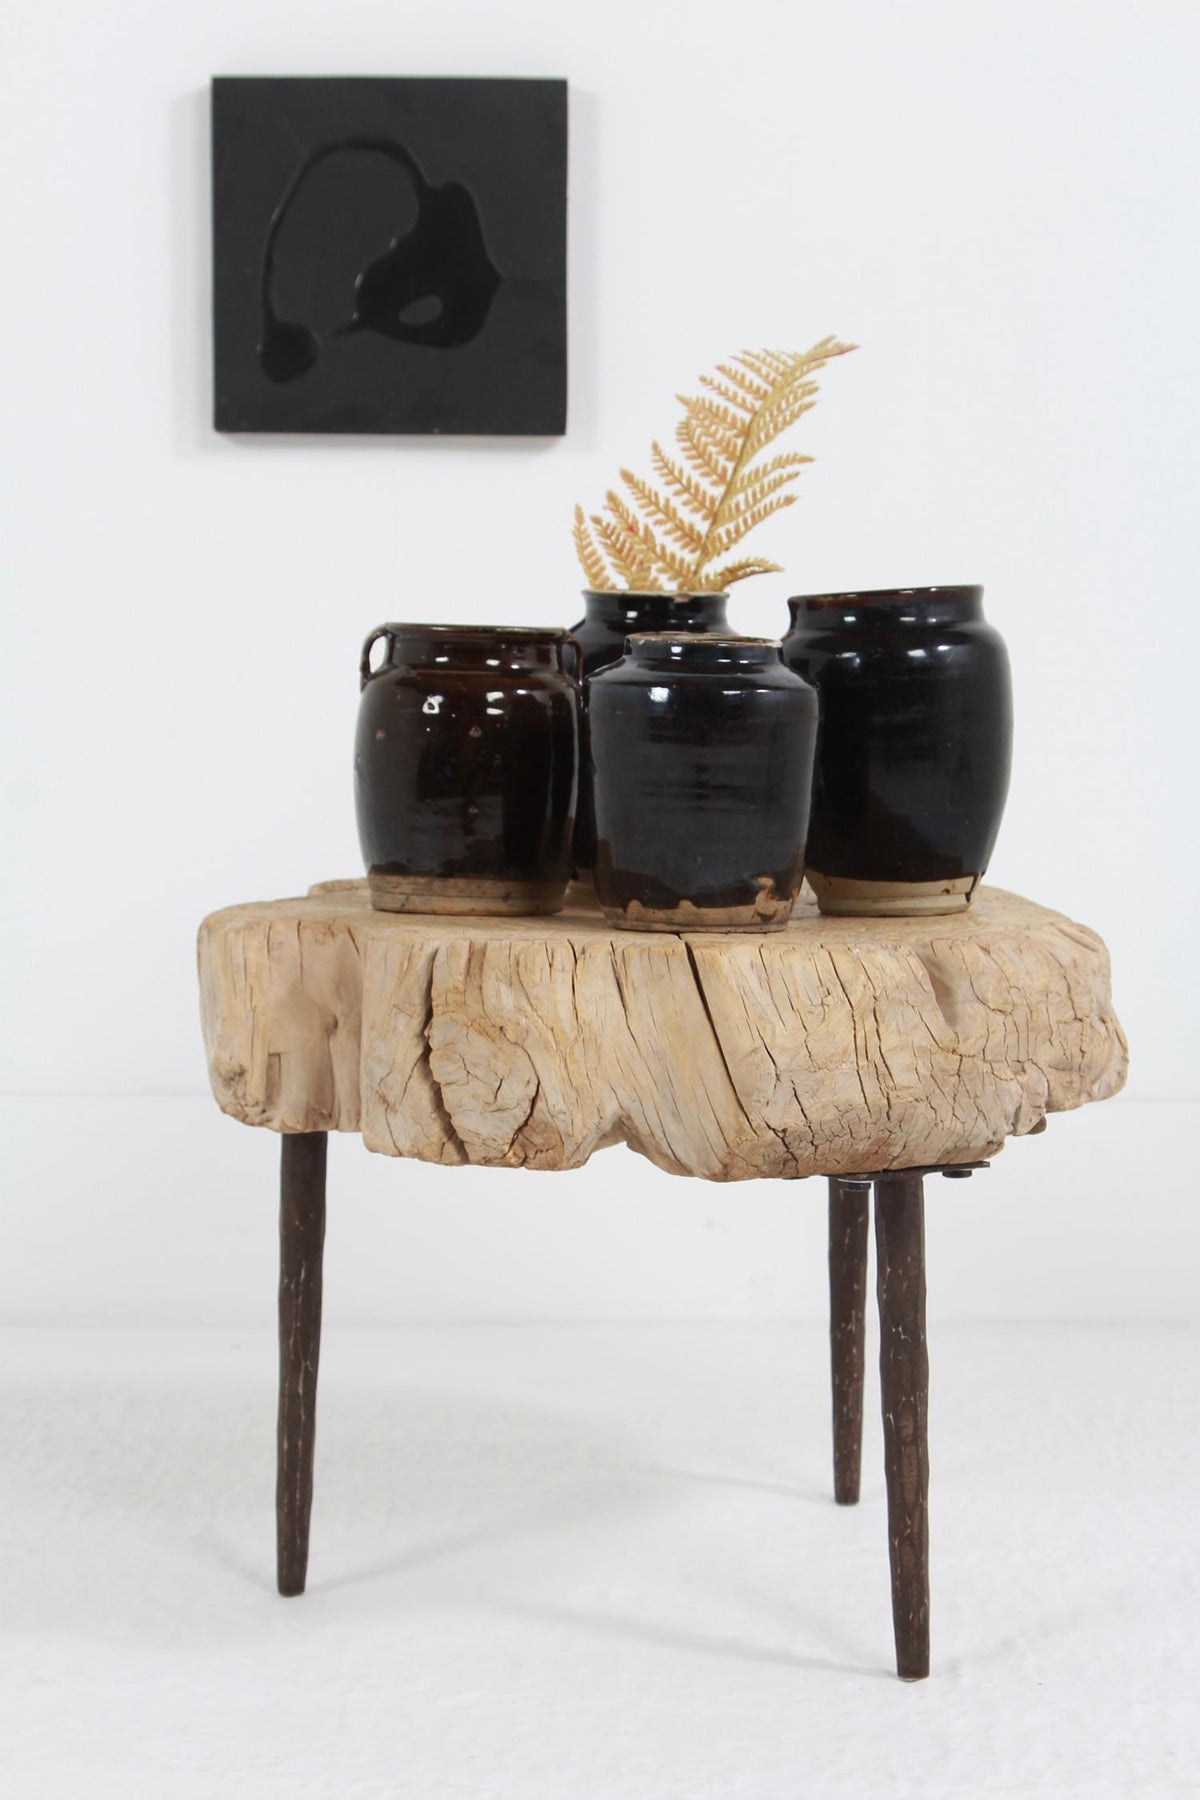 COLLECTION OF FOUR  HANDMADE CHINESE BLACK GLAZED POTTERY JARS